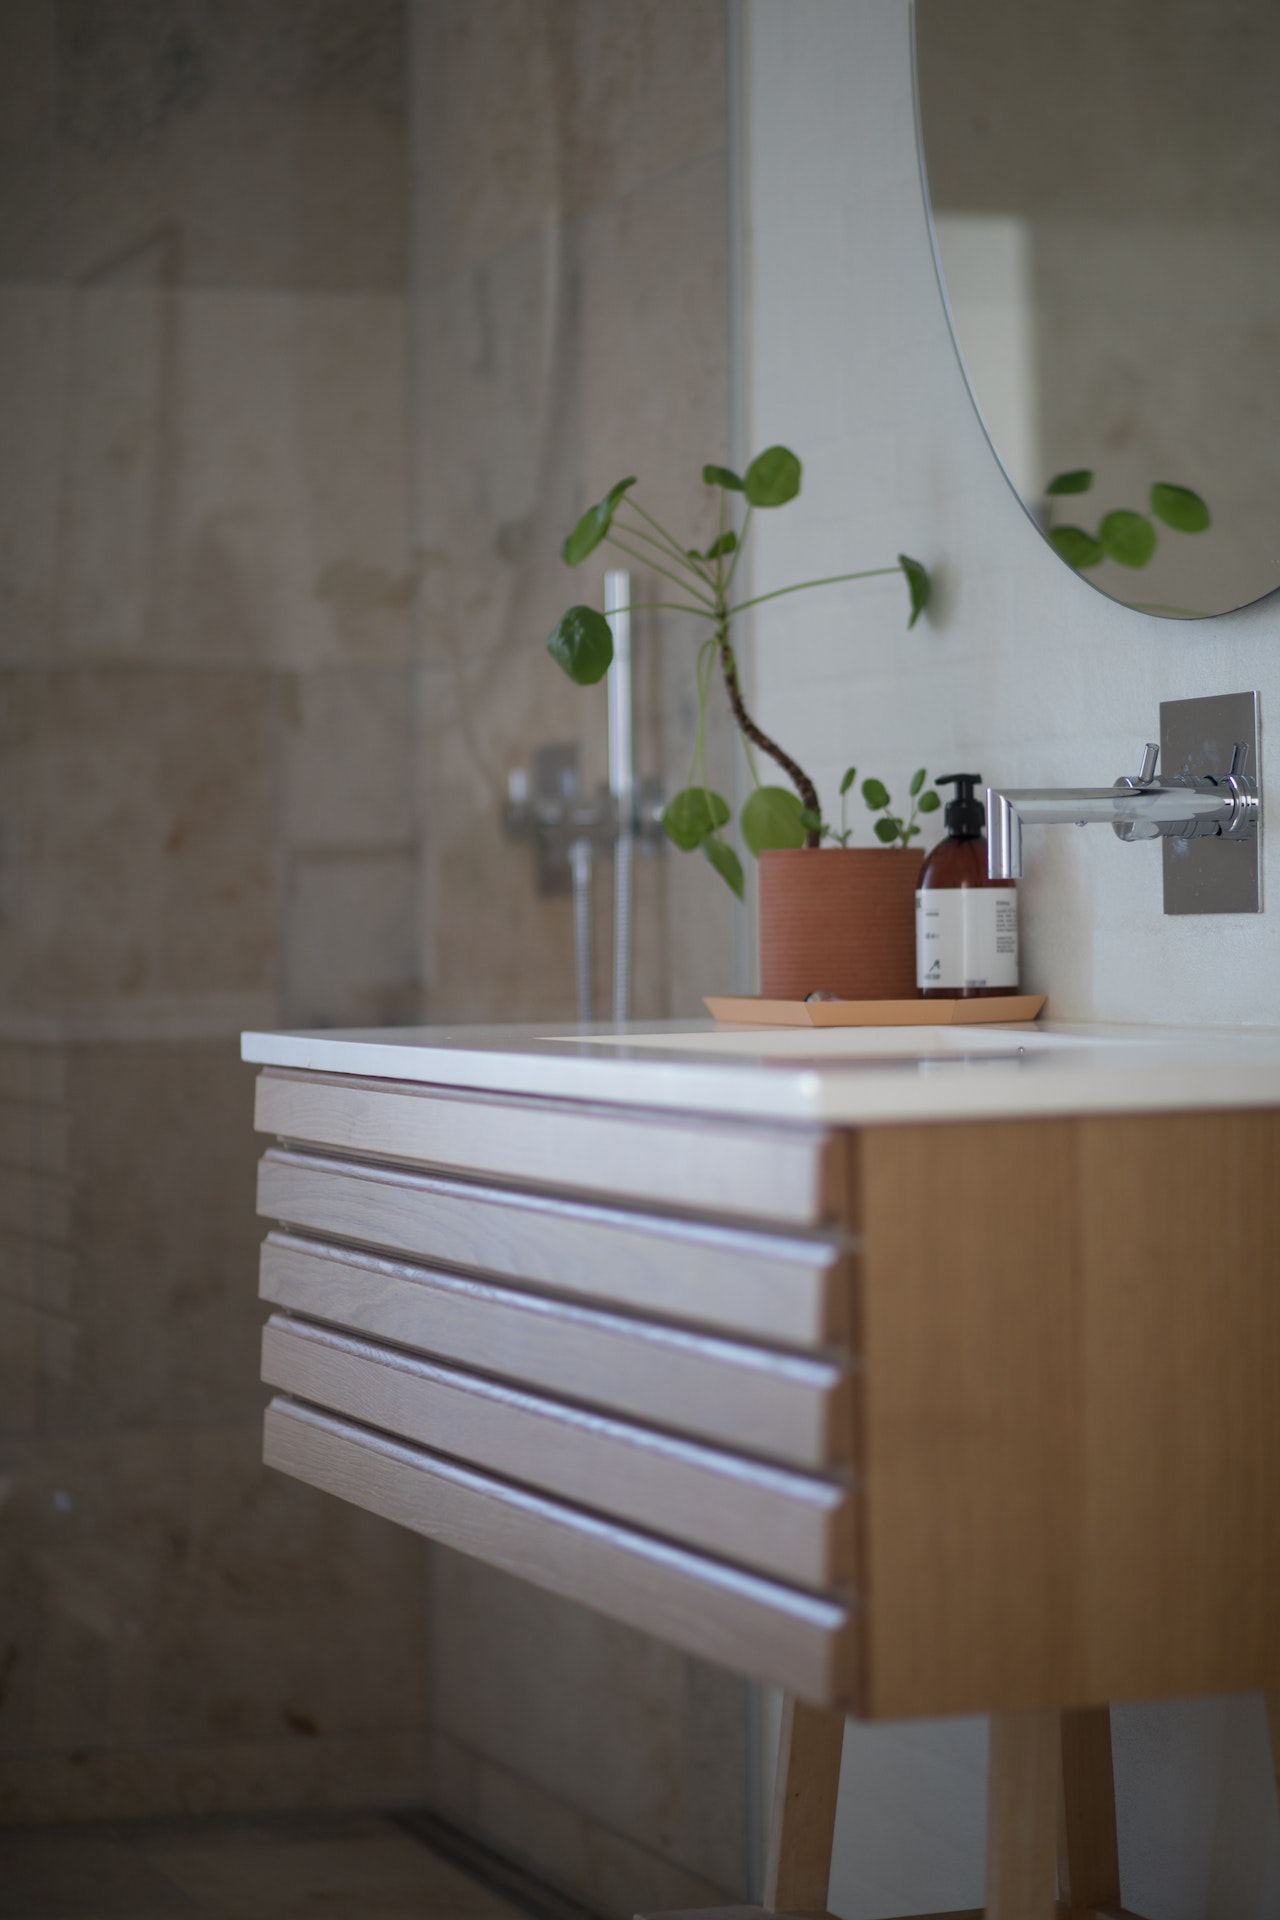 Enduring & Functional: Selecting The Right Materials For Your Bathroom Surfaces